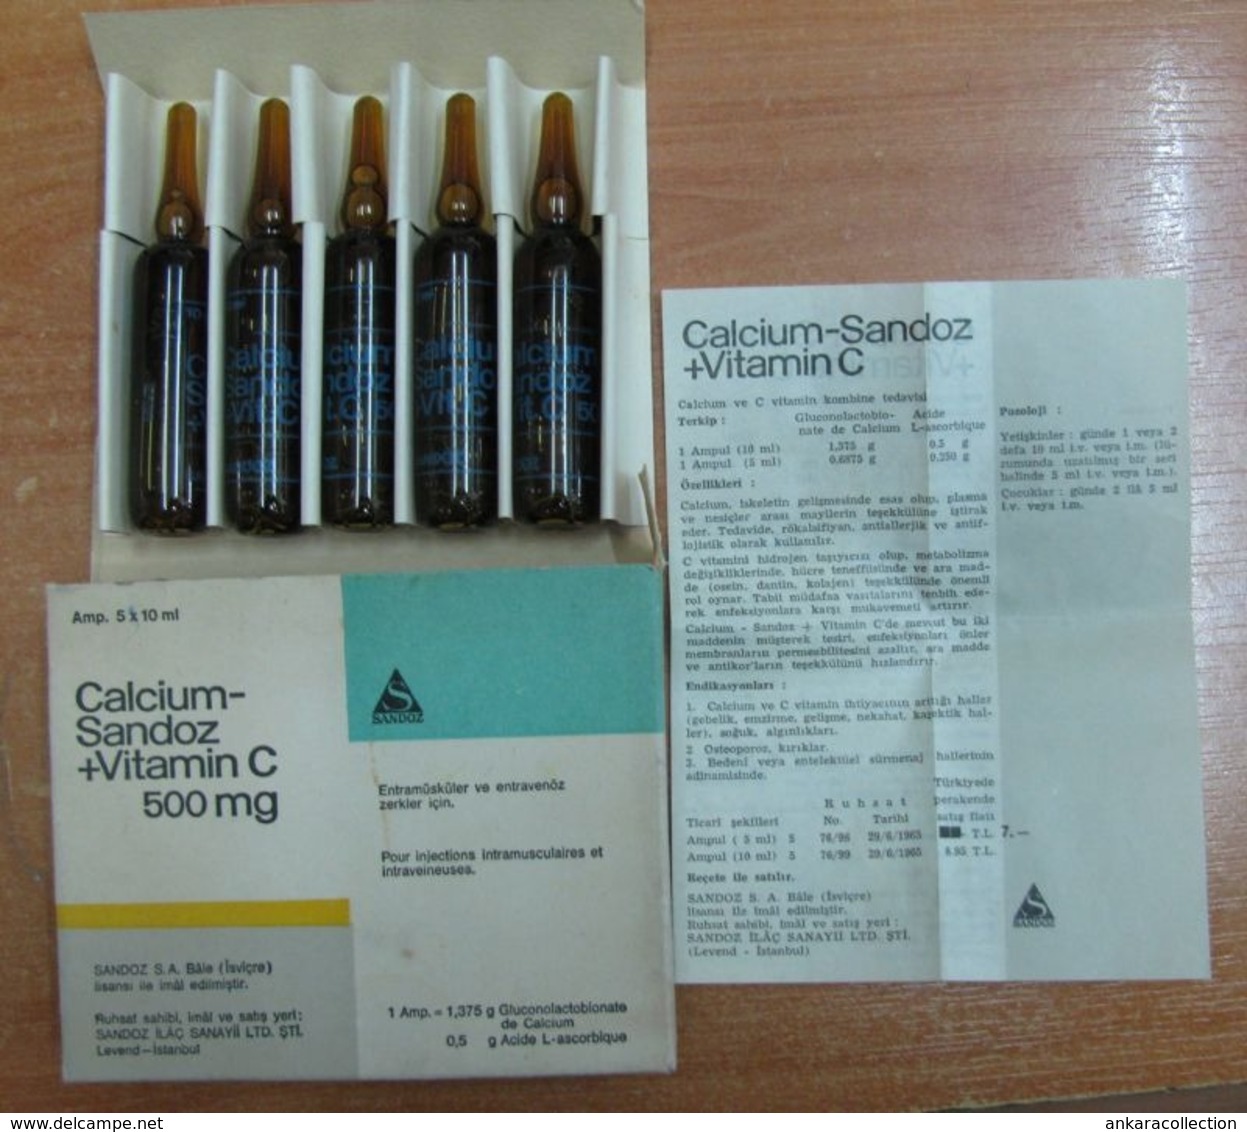 AC - CALCIUM SANDOZ + VITAMIN C 4 AMPOULES IT IS FOR COLLECTION NOT USABLE VINTAGE MEDICINE - Medical & Dental Equipment